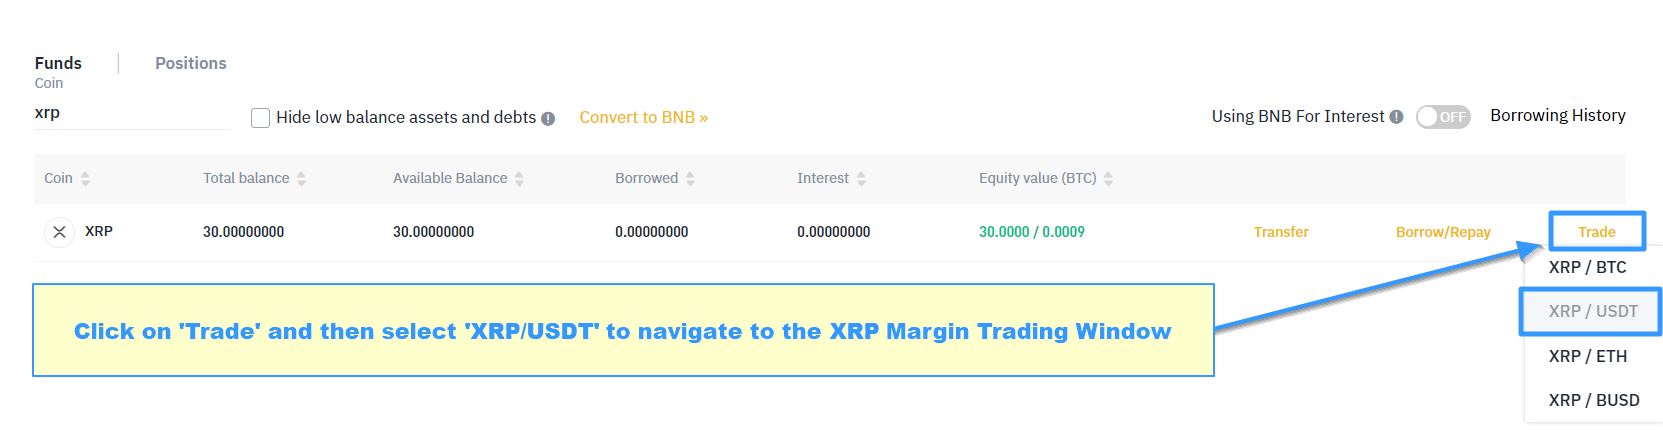 Ripple Margin Trading - Buying XRP with Leverage | Coin Guru